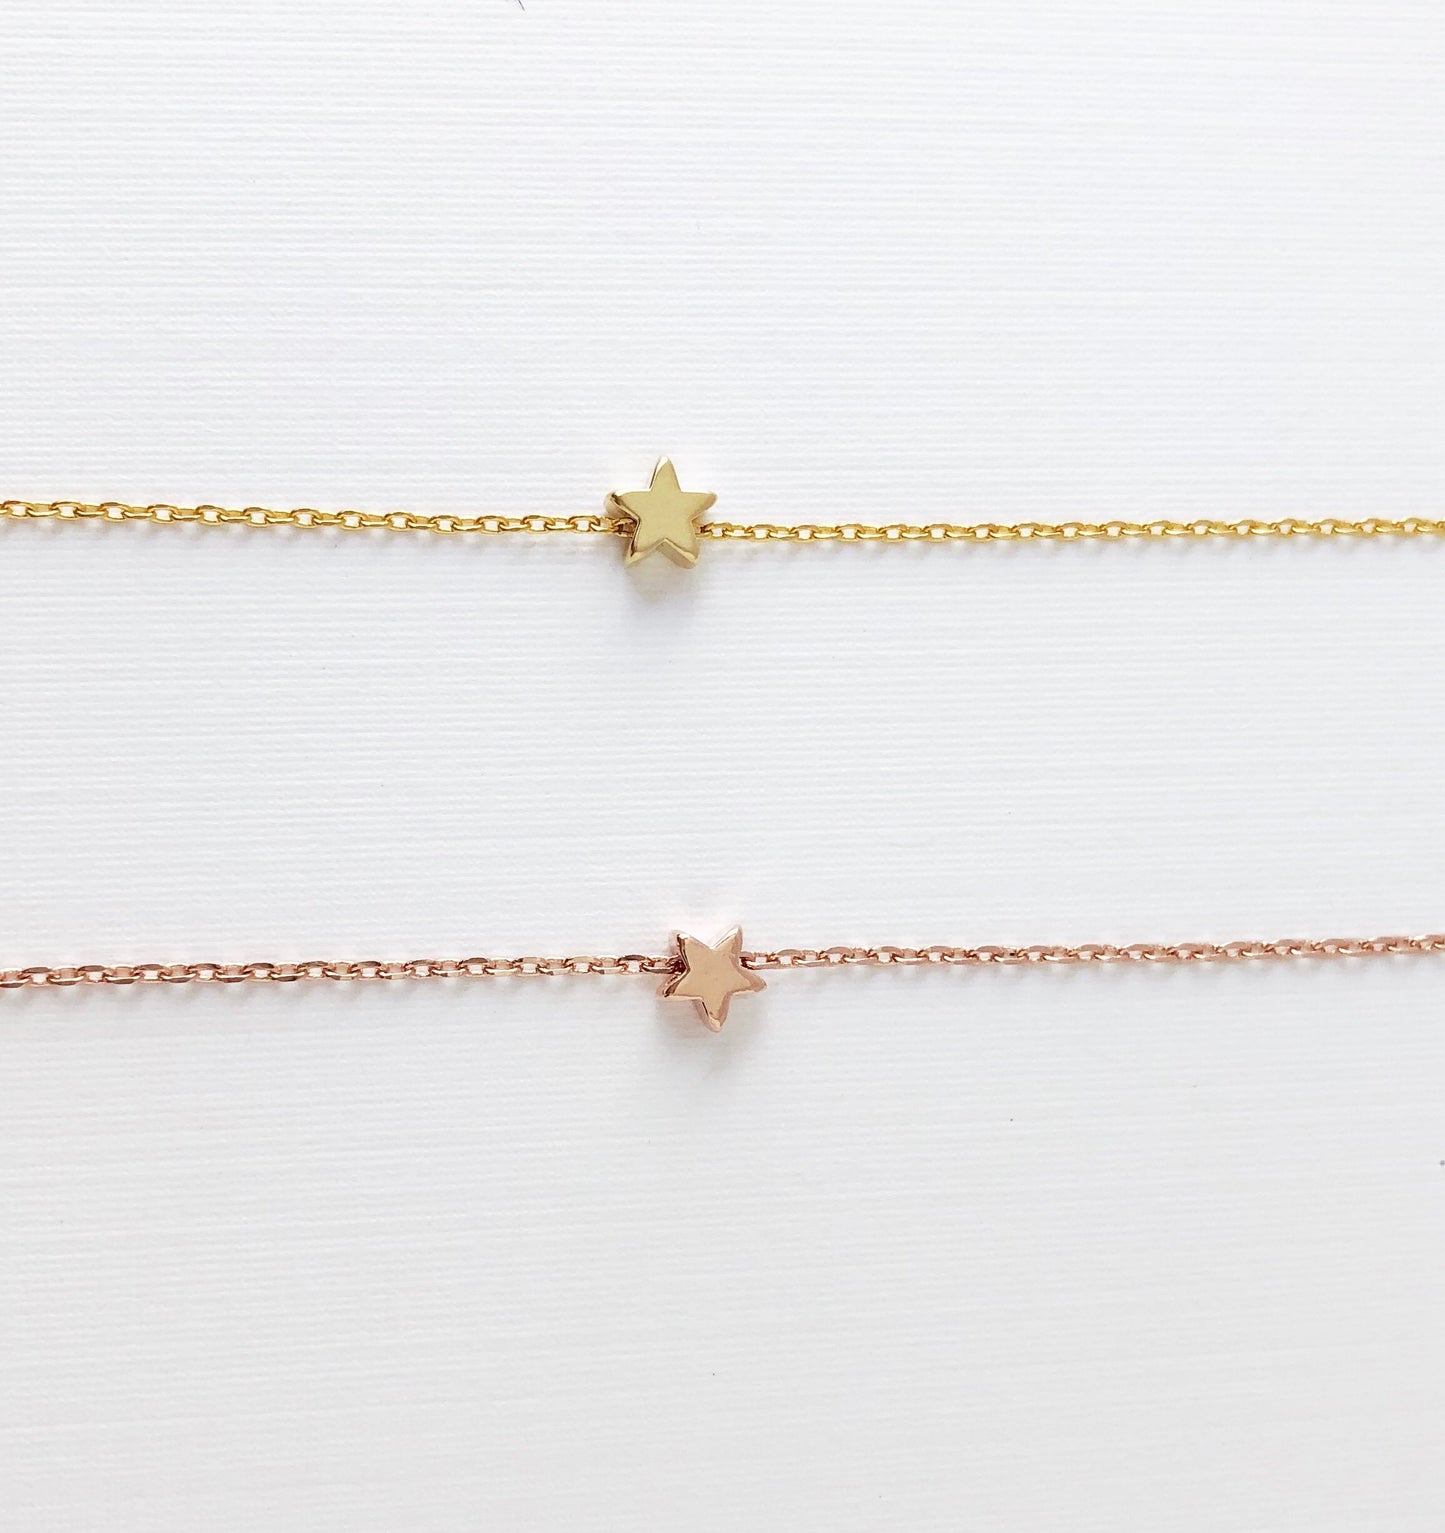 Simple necklace, friend star necklace, Gold necklace, Rose gold necklace, celestial jewelry, Dainty star jewelry, Layering necklace,